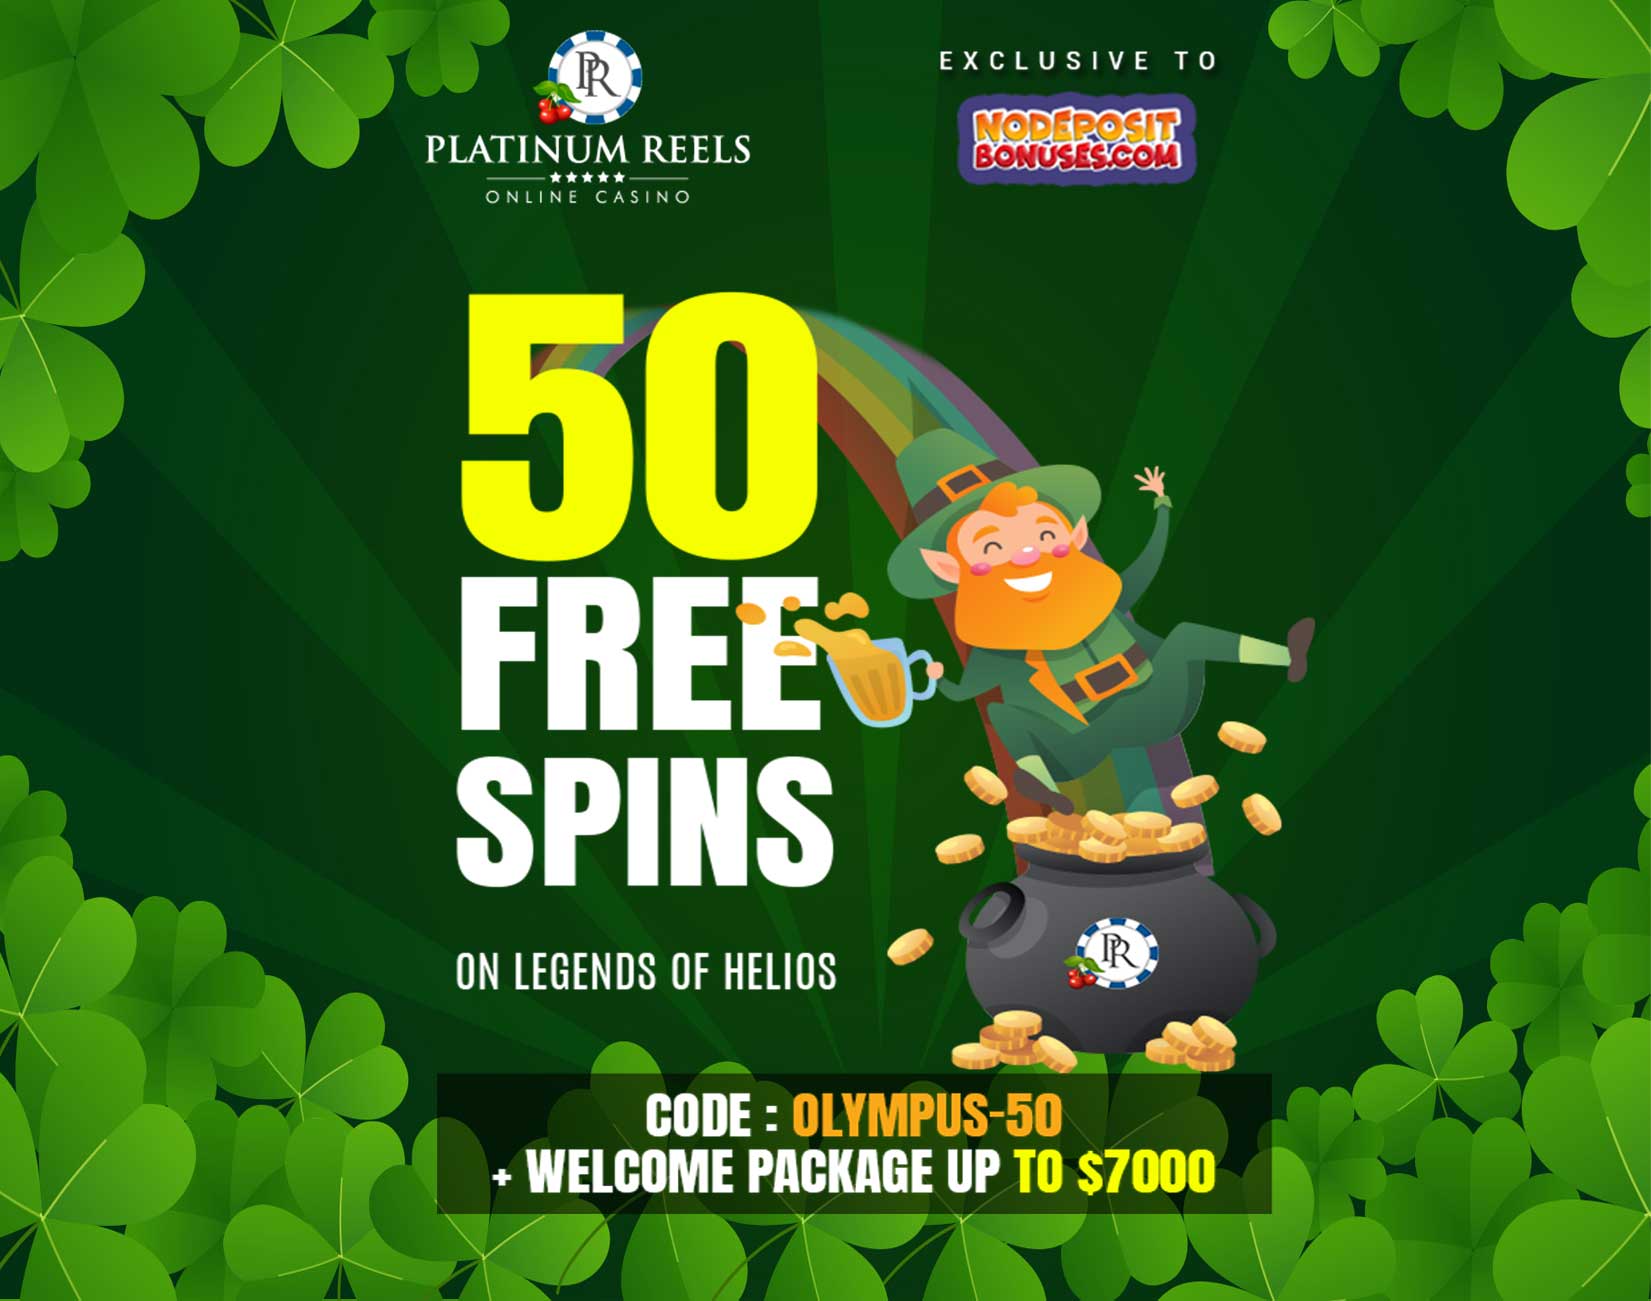 50-free-spins-on-legends-of-helios-at-Platinum-Reels-Casino